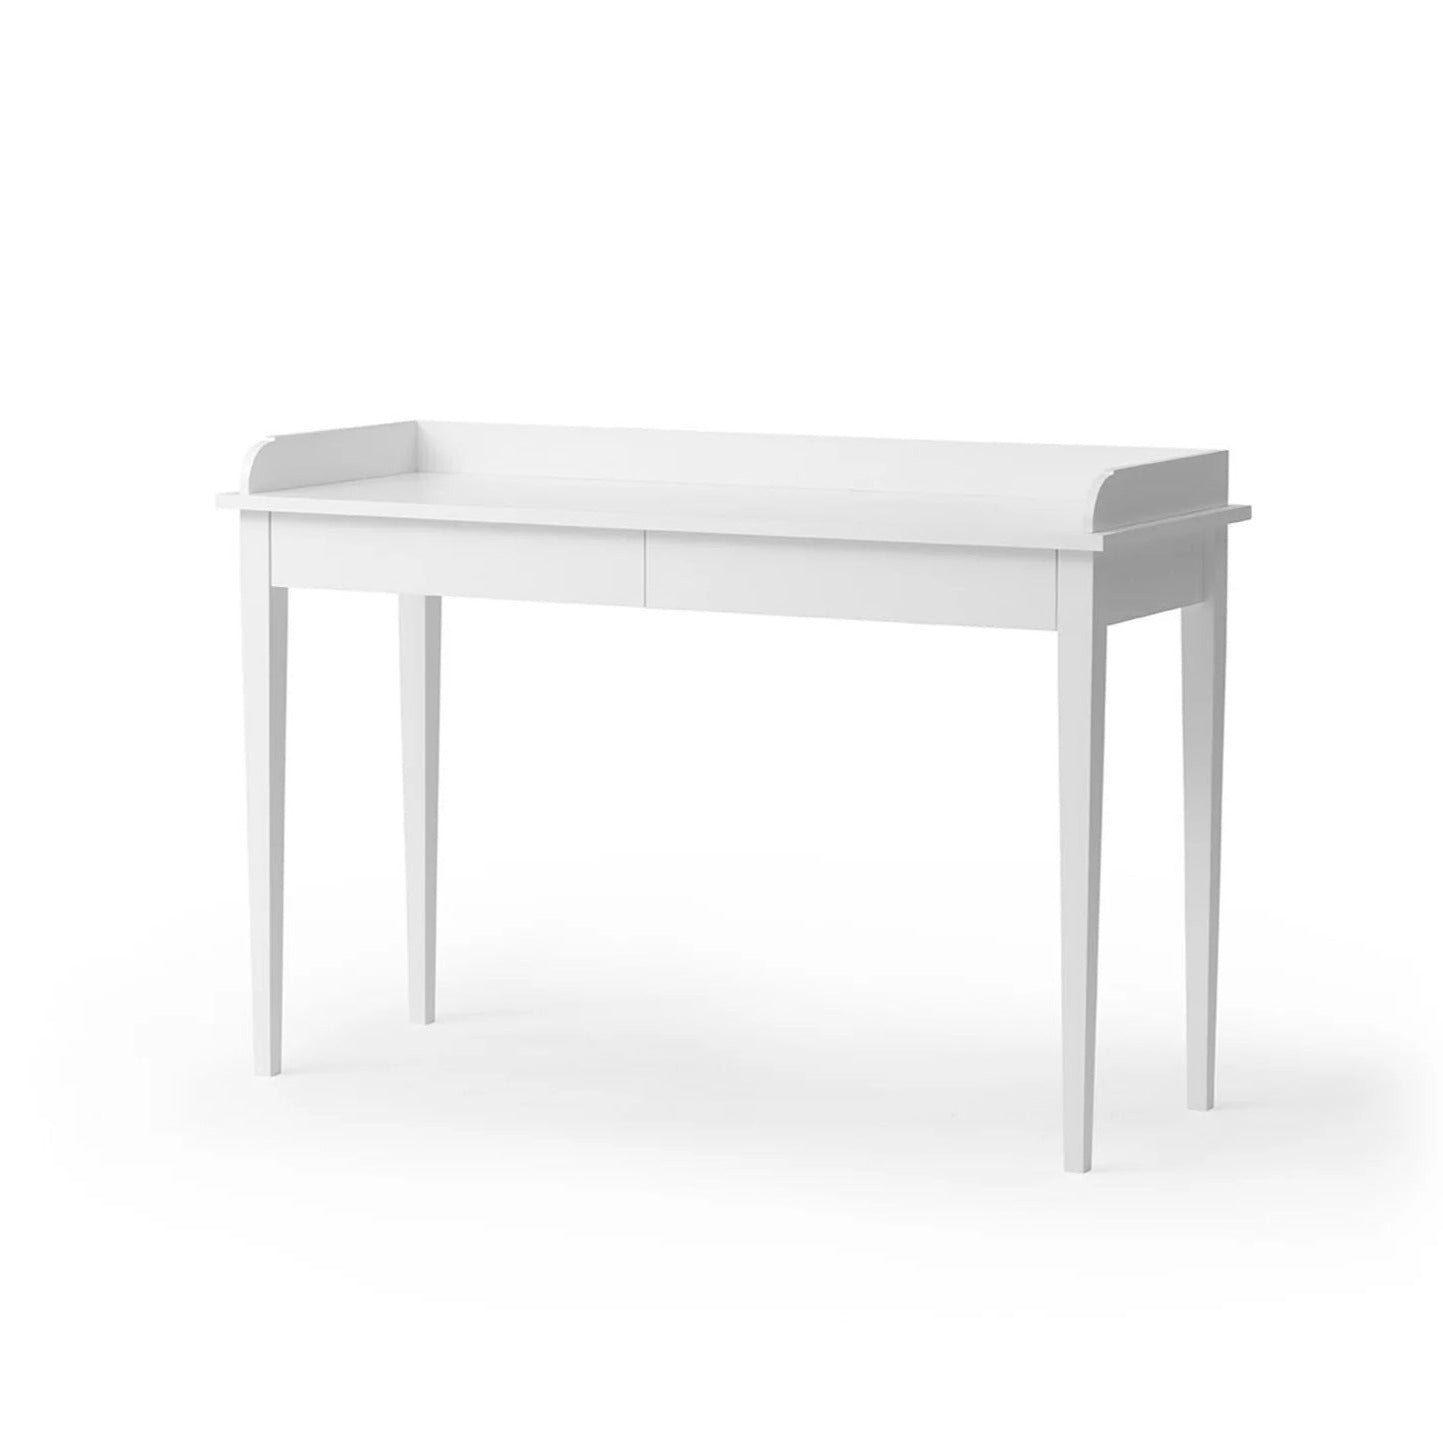 Oliver Furniture Seaside Console Table - White